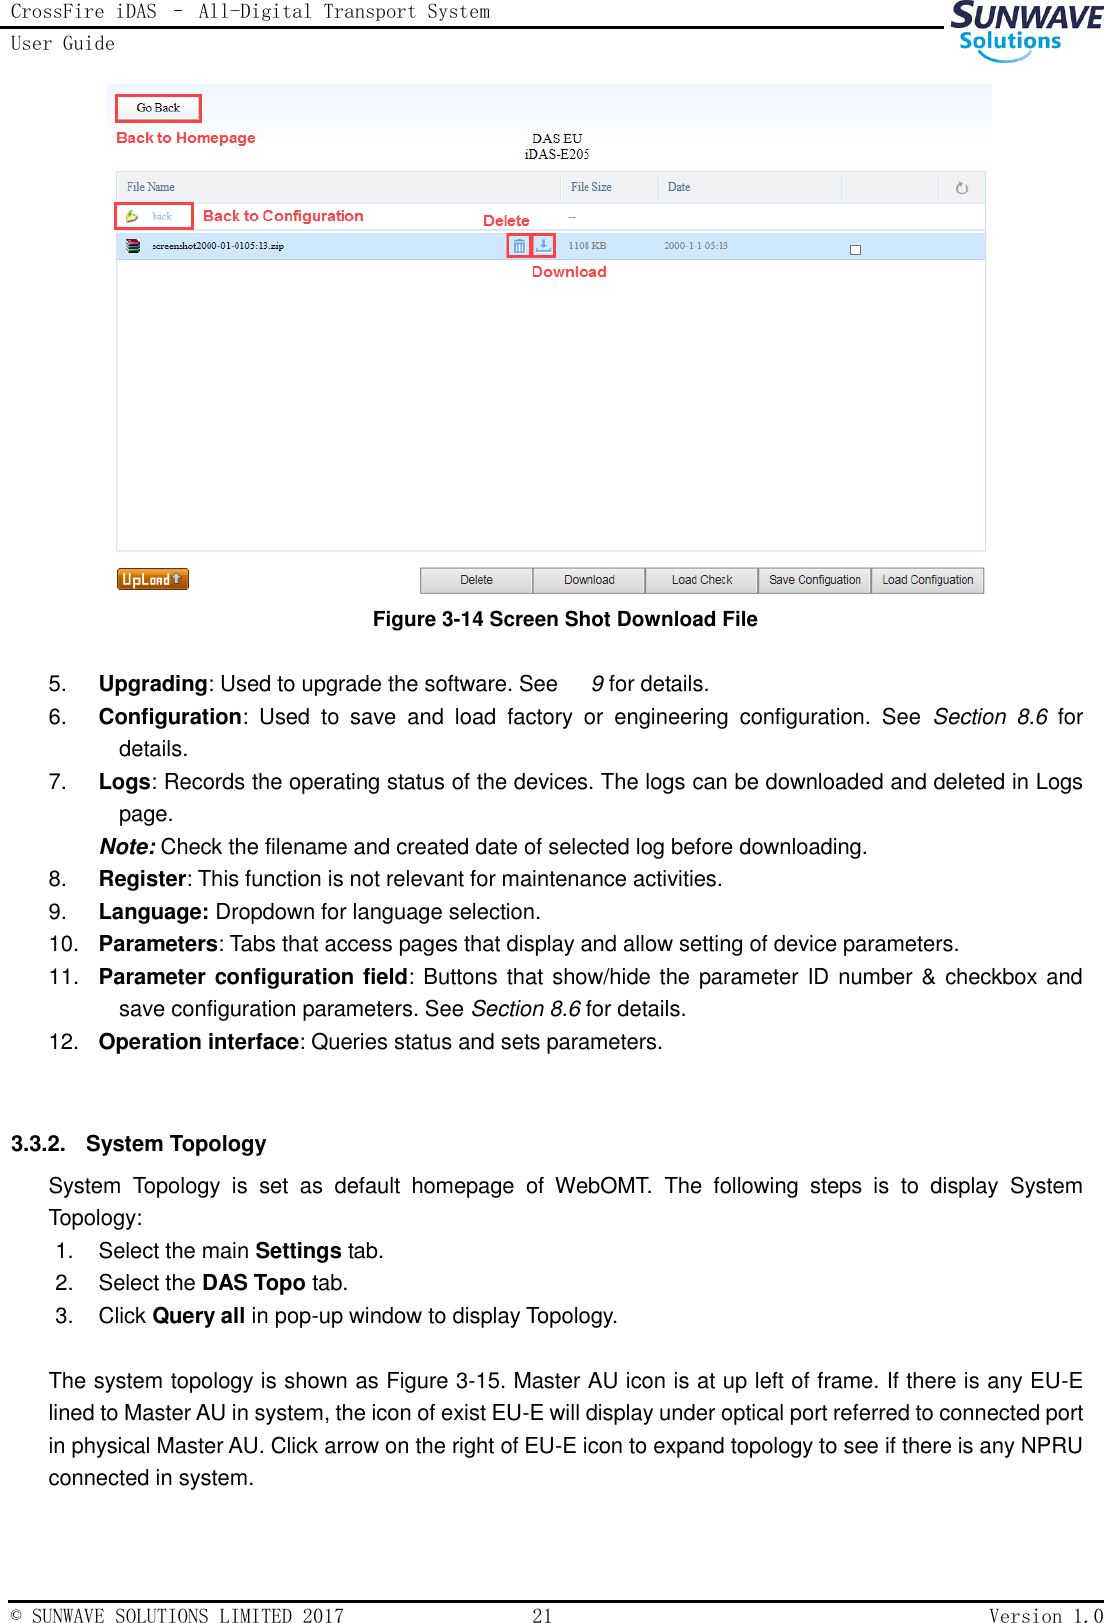 CrossFire iDAS – All-Digital Transport System User Guide   © SUNWAVE SOLUTIONS LIMITED 2017  21  Version 1.0   Figure 3-14 Screen Shot Download File  5. Upgrading: Used to upgrade the software. See      9 for details. 6. Configuration:  Used  to  save  and  load  factory  or  engineering  configuration.  See  Section  8.6  for details. 7. Logs: Records the operating status of the devices. The logs can be downloaded and deleted in Logs page.   Note: Check the filename and created date of selected log before downloading. 8. Register: This function is not relevant for maintenance activities. 9. Language: Dropdown for language selection. 10. Parameters: Tabs that access pages that display and allow setting of device parameters. 11. Parameter configuration field: Buttons that show/hide the parameter ID number &amp; checkbox and save configuration parameters. See Section 8.6 for details. 12. Operation interface: Queries status and sets parameters.  3.3.2.  System Topology System  Topology  is  set  as  default  homepage  of  WebOMT.  The  following  steps  is  to  display  System Topology: 1.  Select the main Settings tab. 2.  Select the DAS Topo tab. 3.  Click Query all in pop-up window to display Topology.  The system topology is shown as Figure 3-15. Master AU icon is at up left of frame. If there is any EU-E lined to Master AU in system, the icon of exist EU-E will display under optical port referred to connected port in physical Master AU. Click arrow on the right of EU-E icon to expand topology to see if there is any NPRU connected in system. 